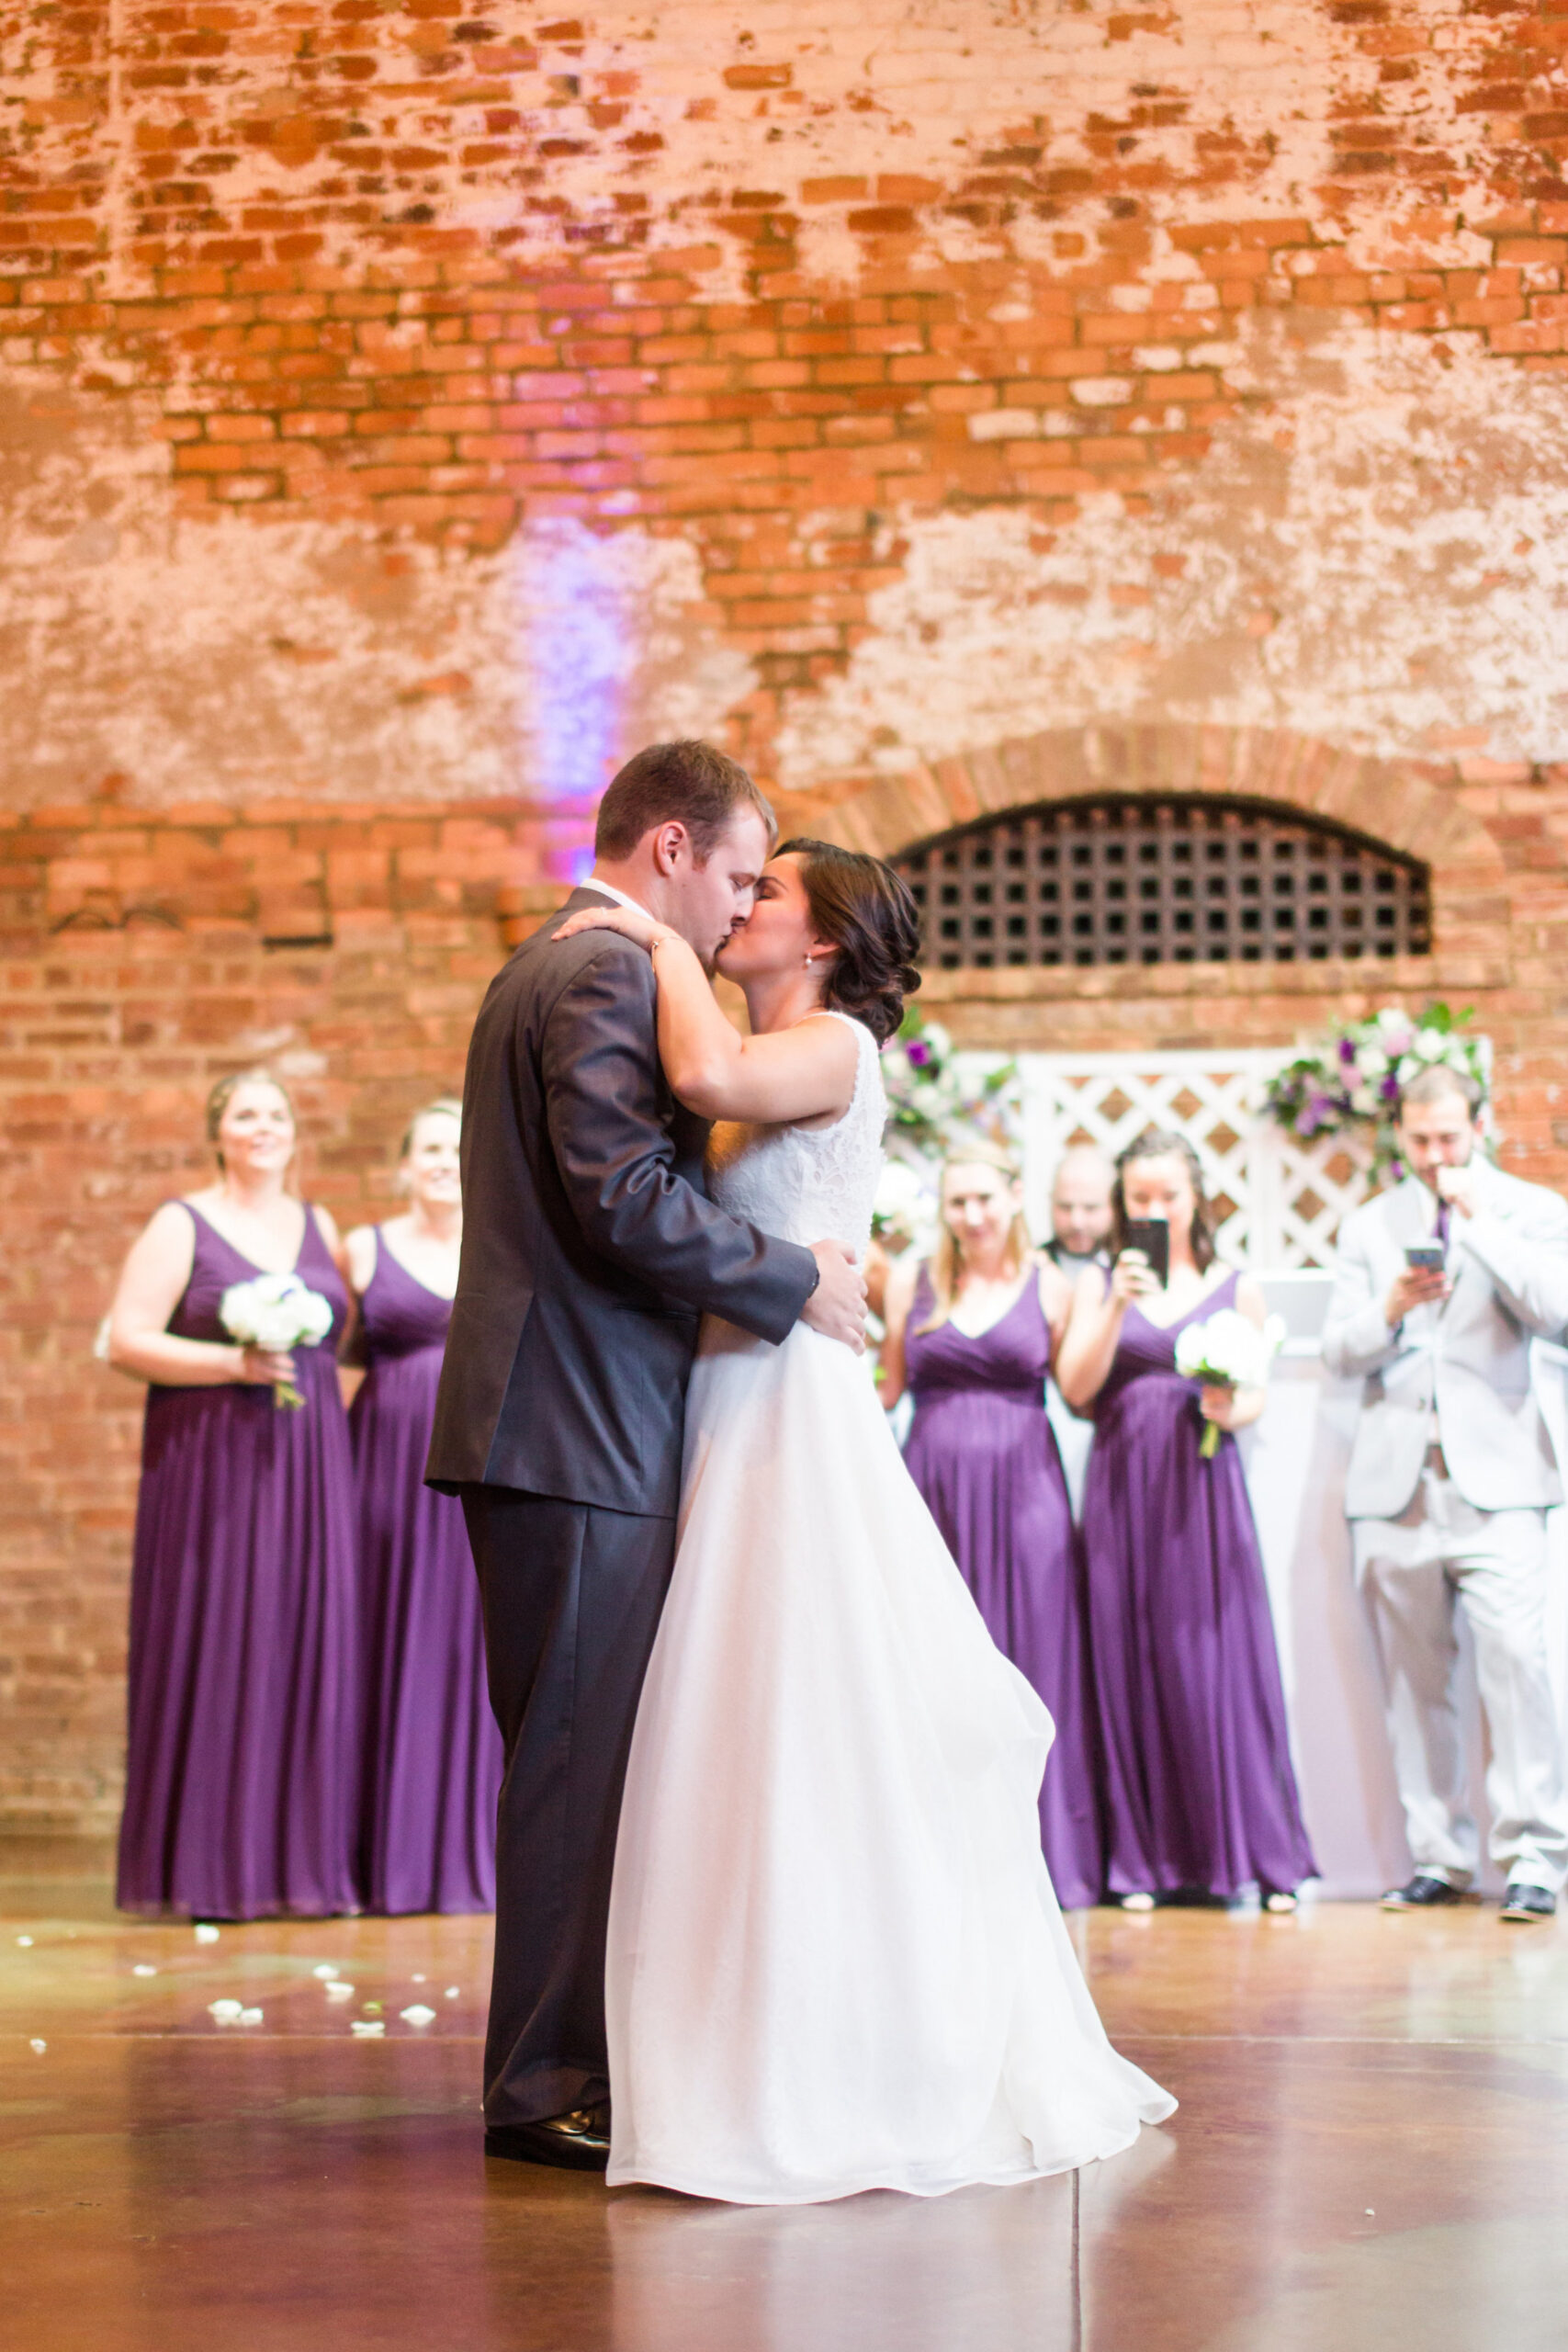  Lee's Brice's "I Don't Dance" was the perfect song for their First Dance. Love that song! 